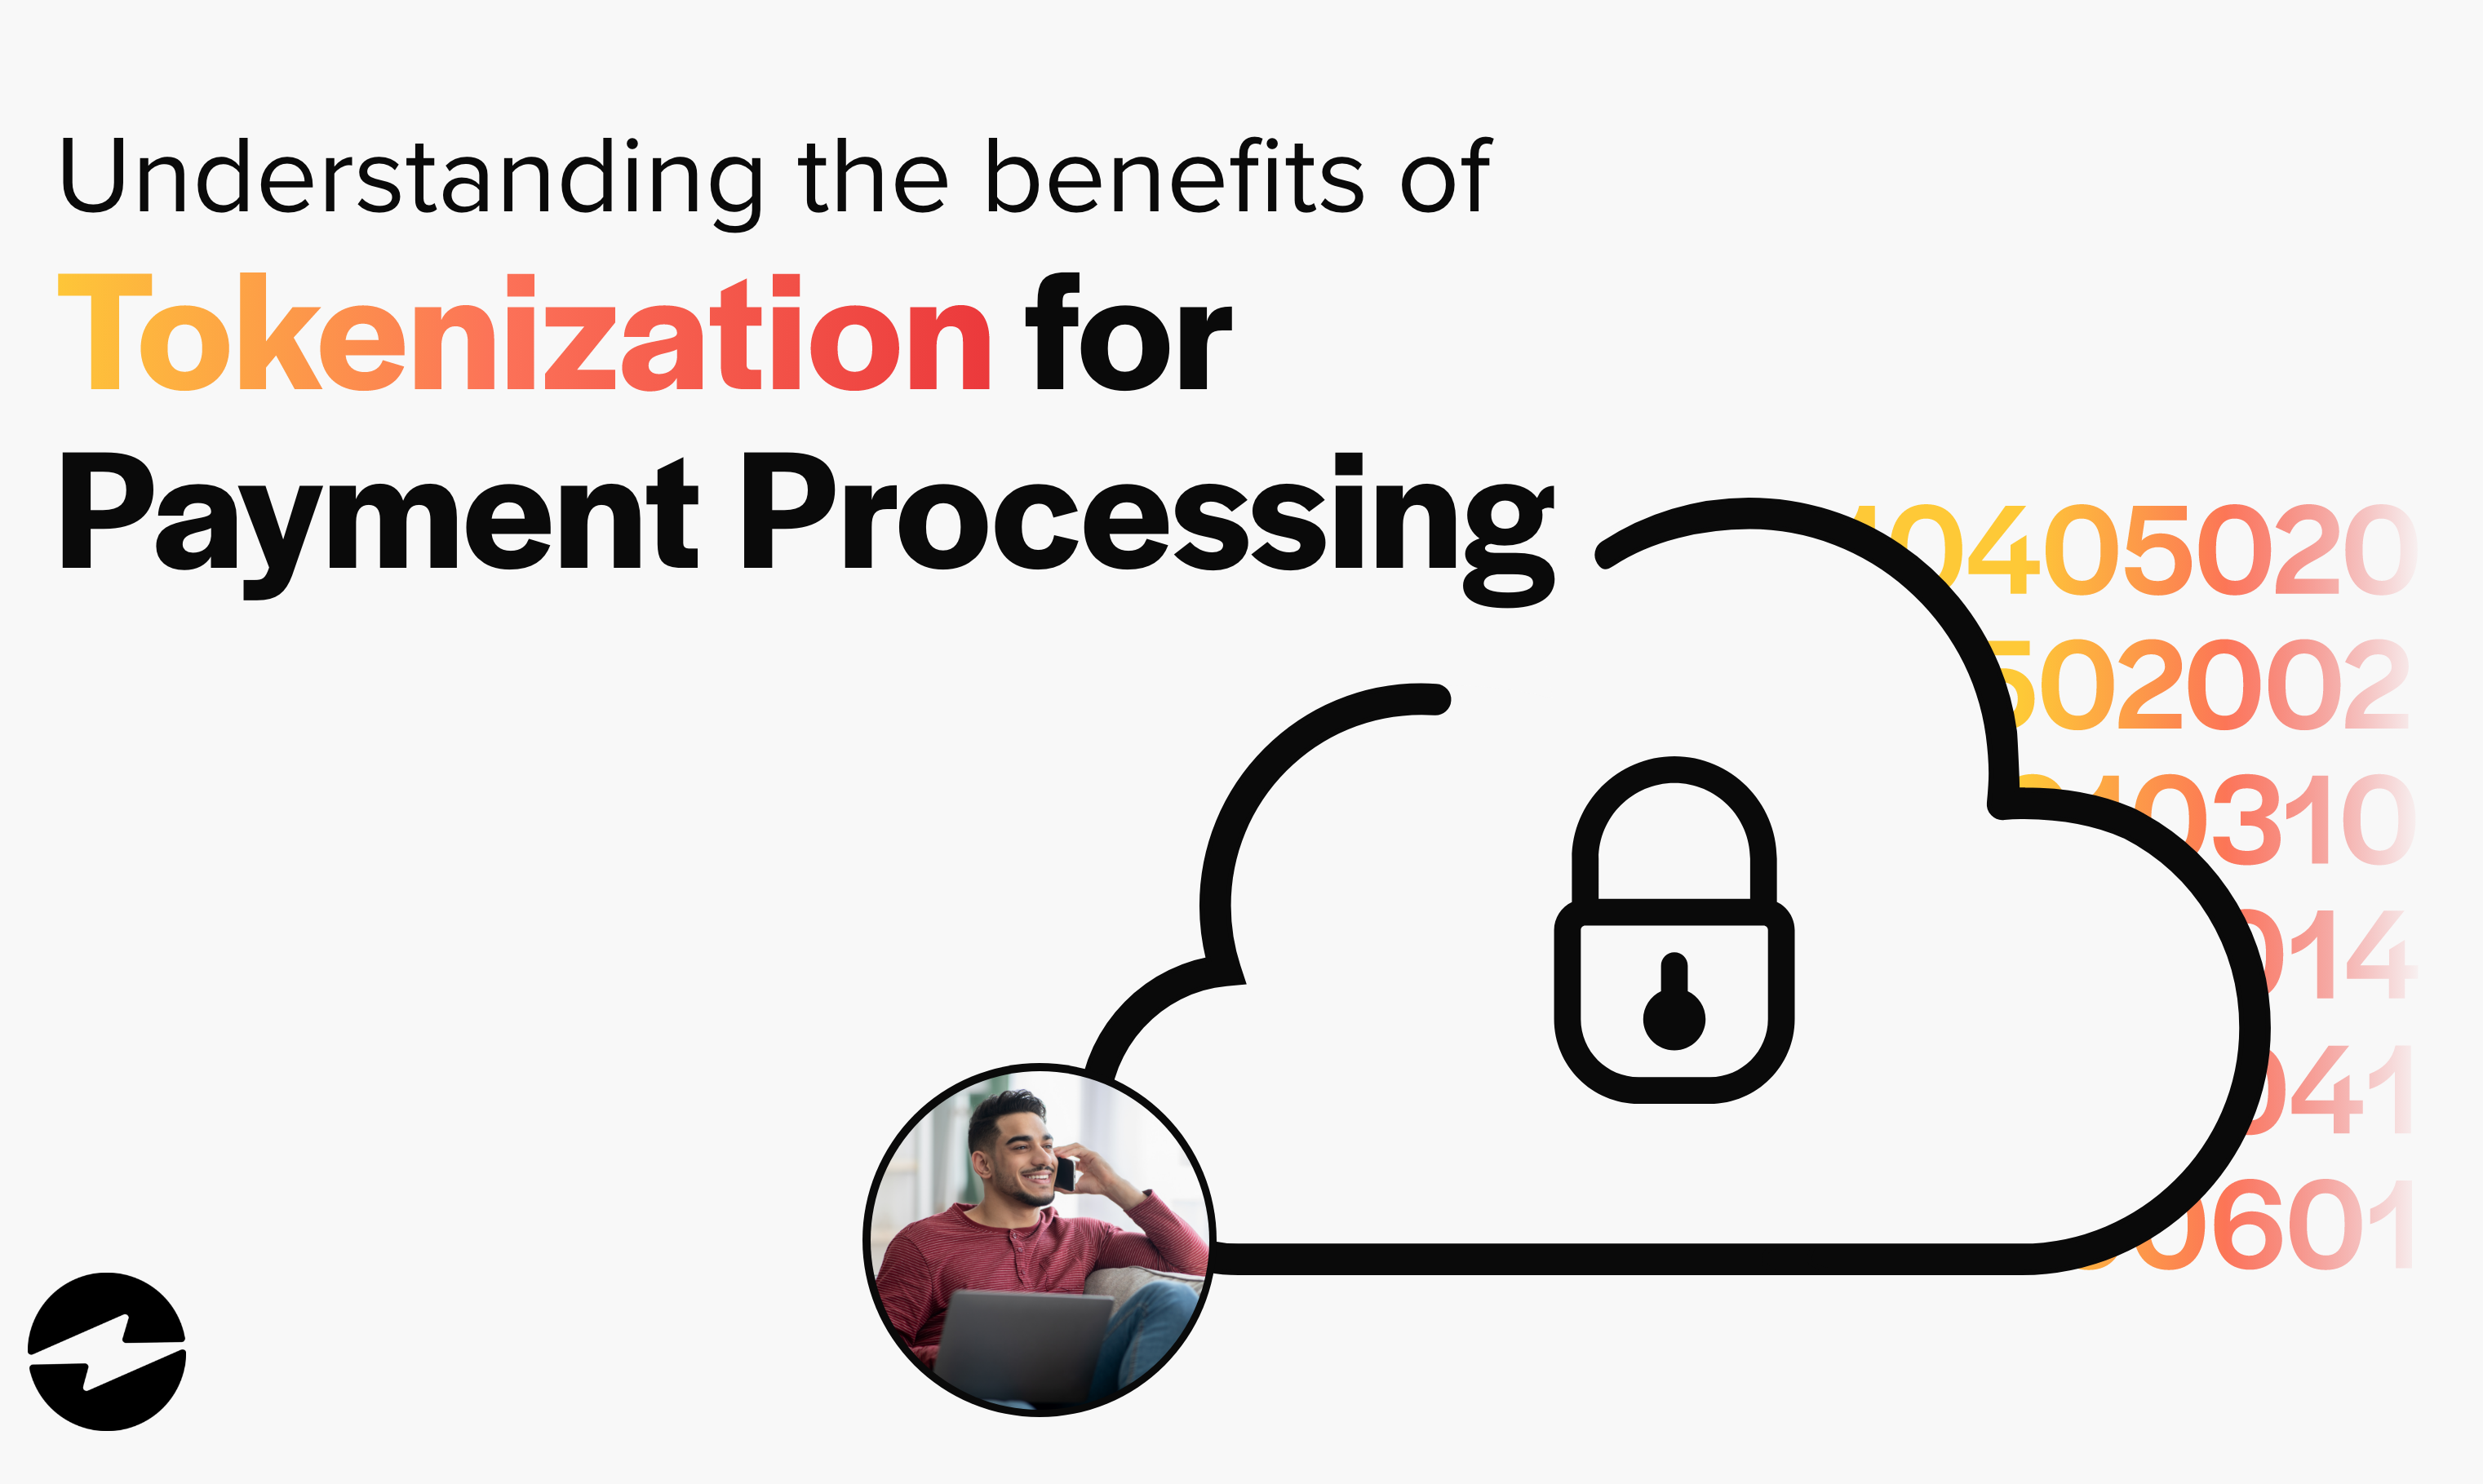 Understanding the Benefits of Tokenization for payment processing